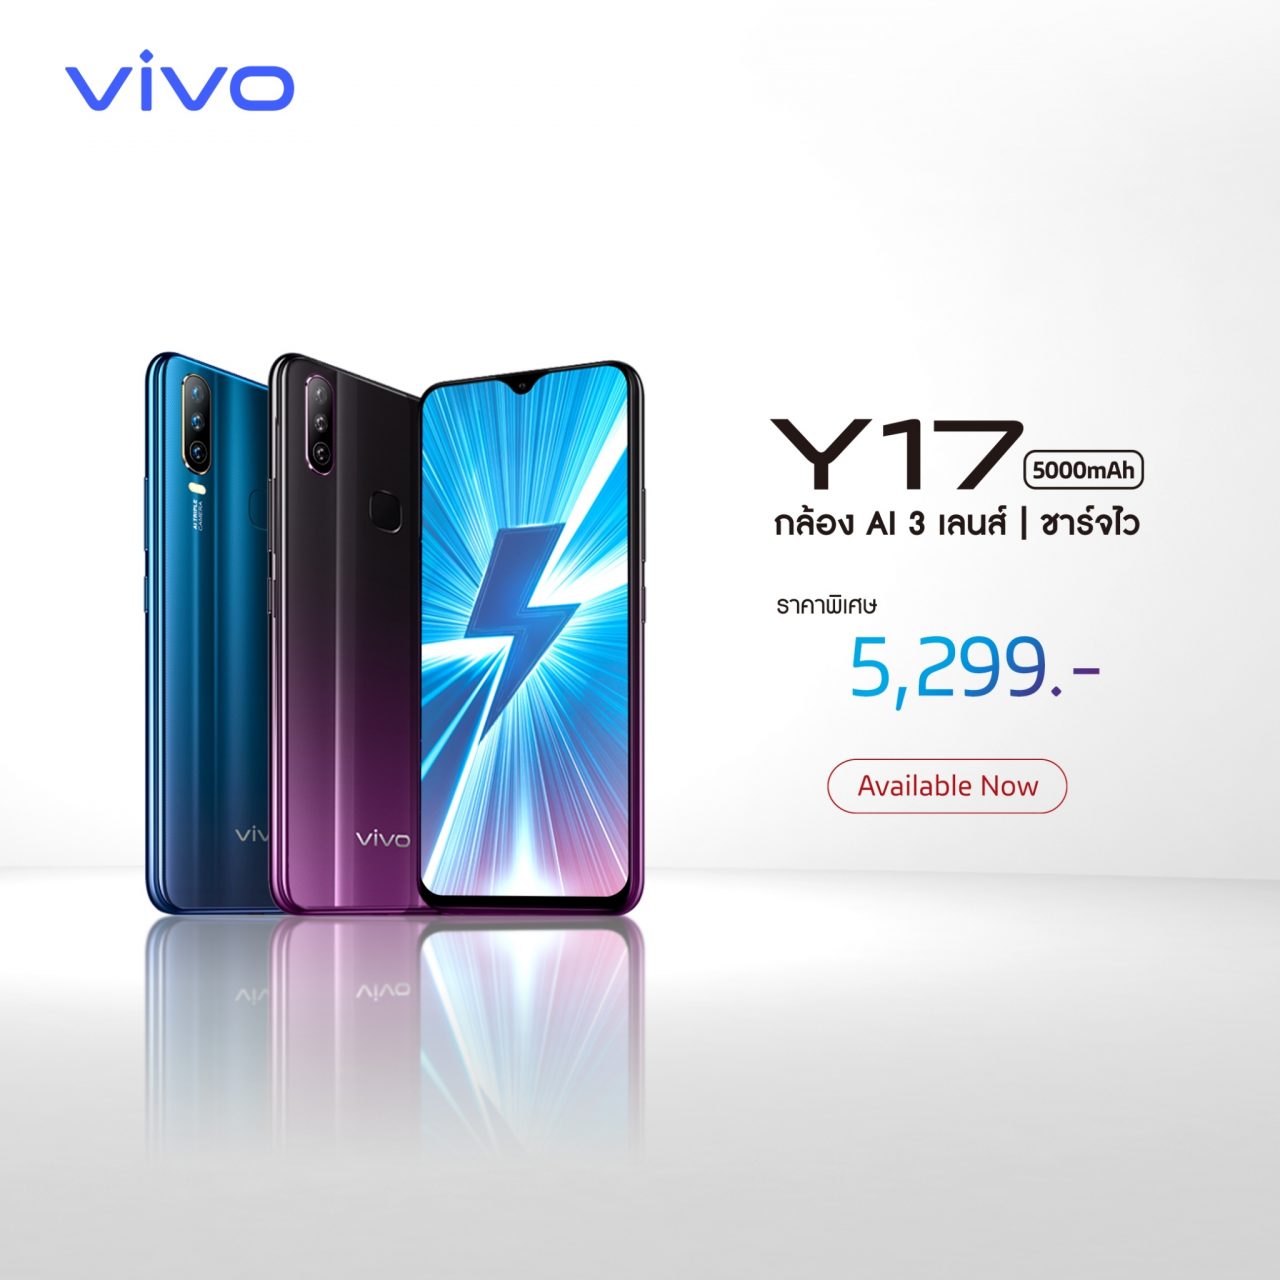 how to tracking a mobile phone Vivo Y17